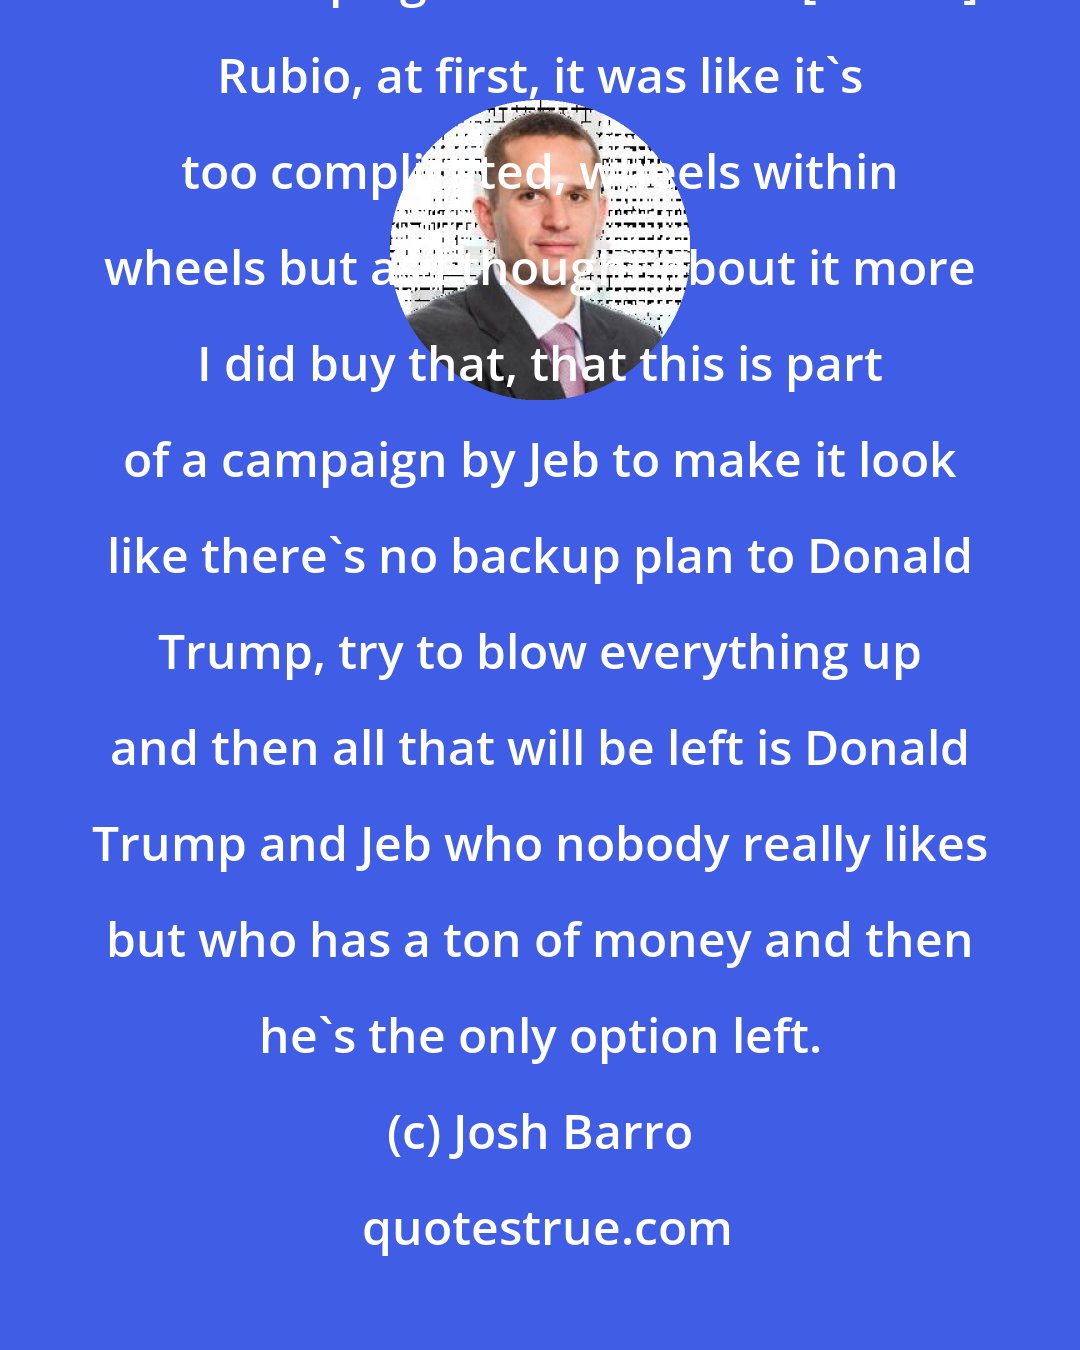 Josh Barro: When people floated this idea that this was a conspiracy by the [Jeb] Bush campaign to undermine [Marco] Rubio, at first, it was like it`s too complicated, wheels within wheels but as I thought about it more I did buy that, that this is part of a campaign by Jeb to make it look like there`s no backup plan to Donald Trump, try to blow everything up and then all that will be left is Donald Trump and Jeb who nobody really likes but who has a ton of money and then he`s the only option left.